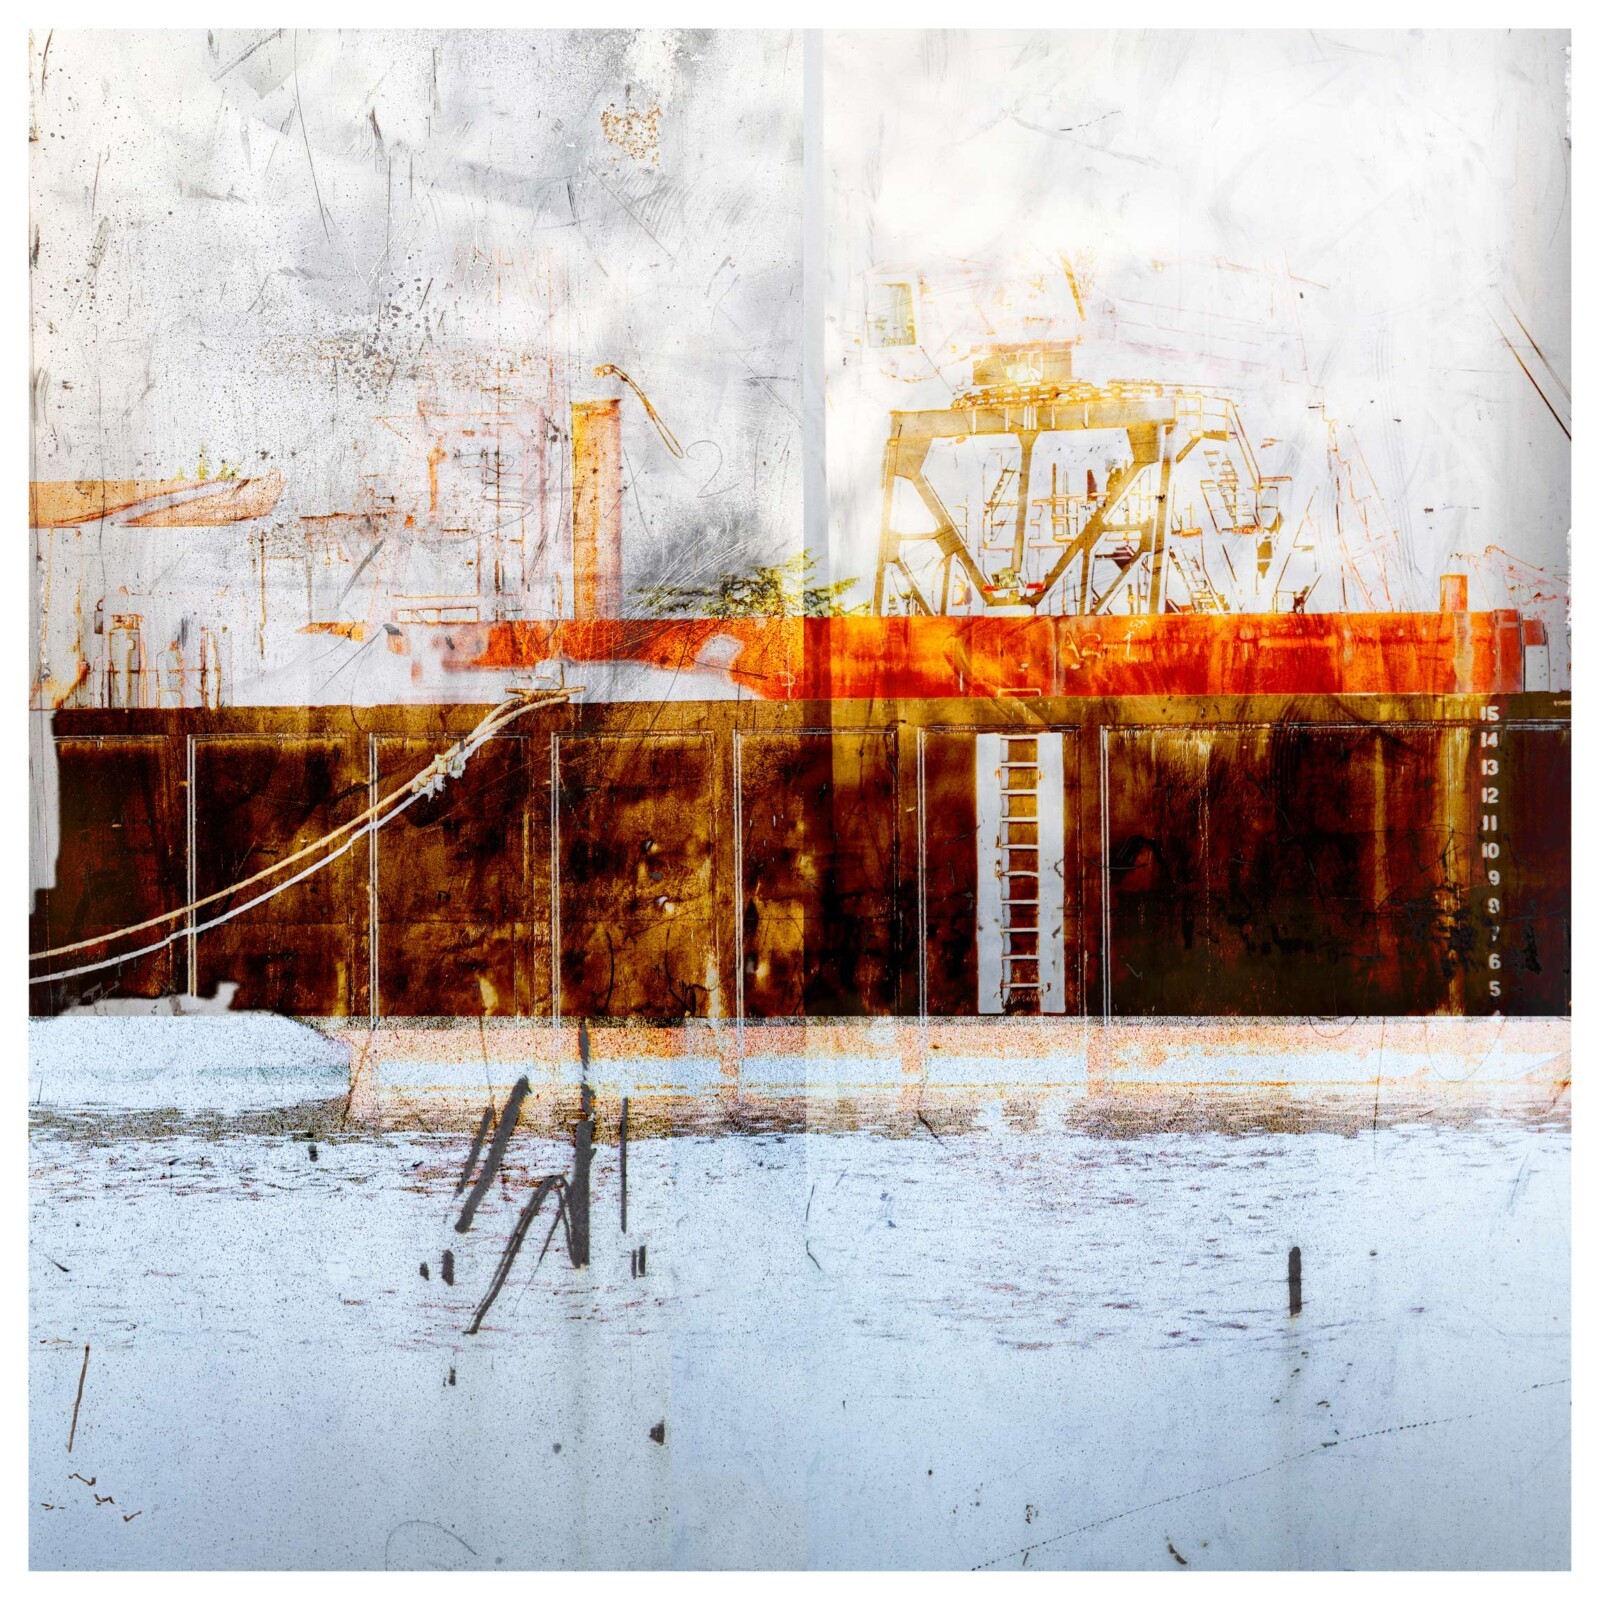 Iskra Johnson, Barge, limited edition archival pigment print-digital collage